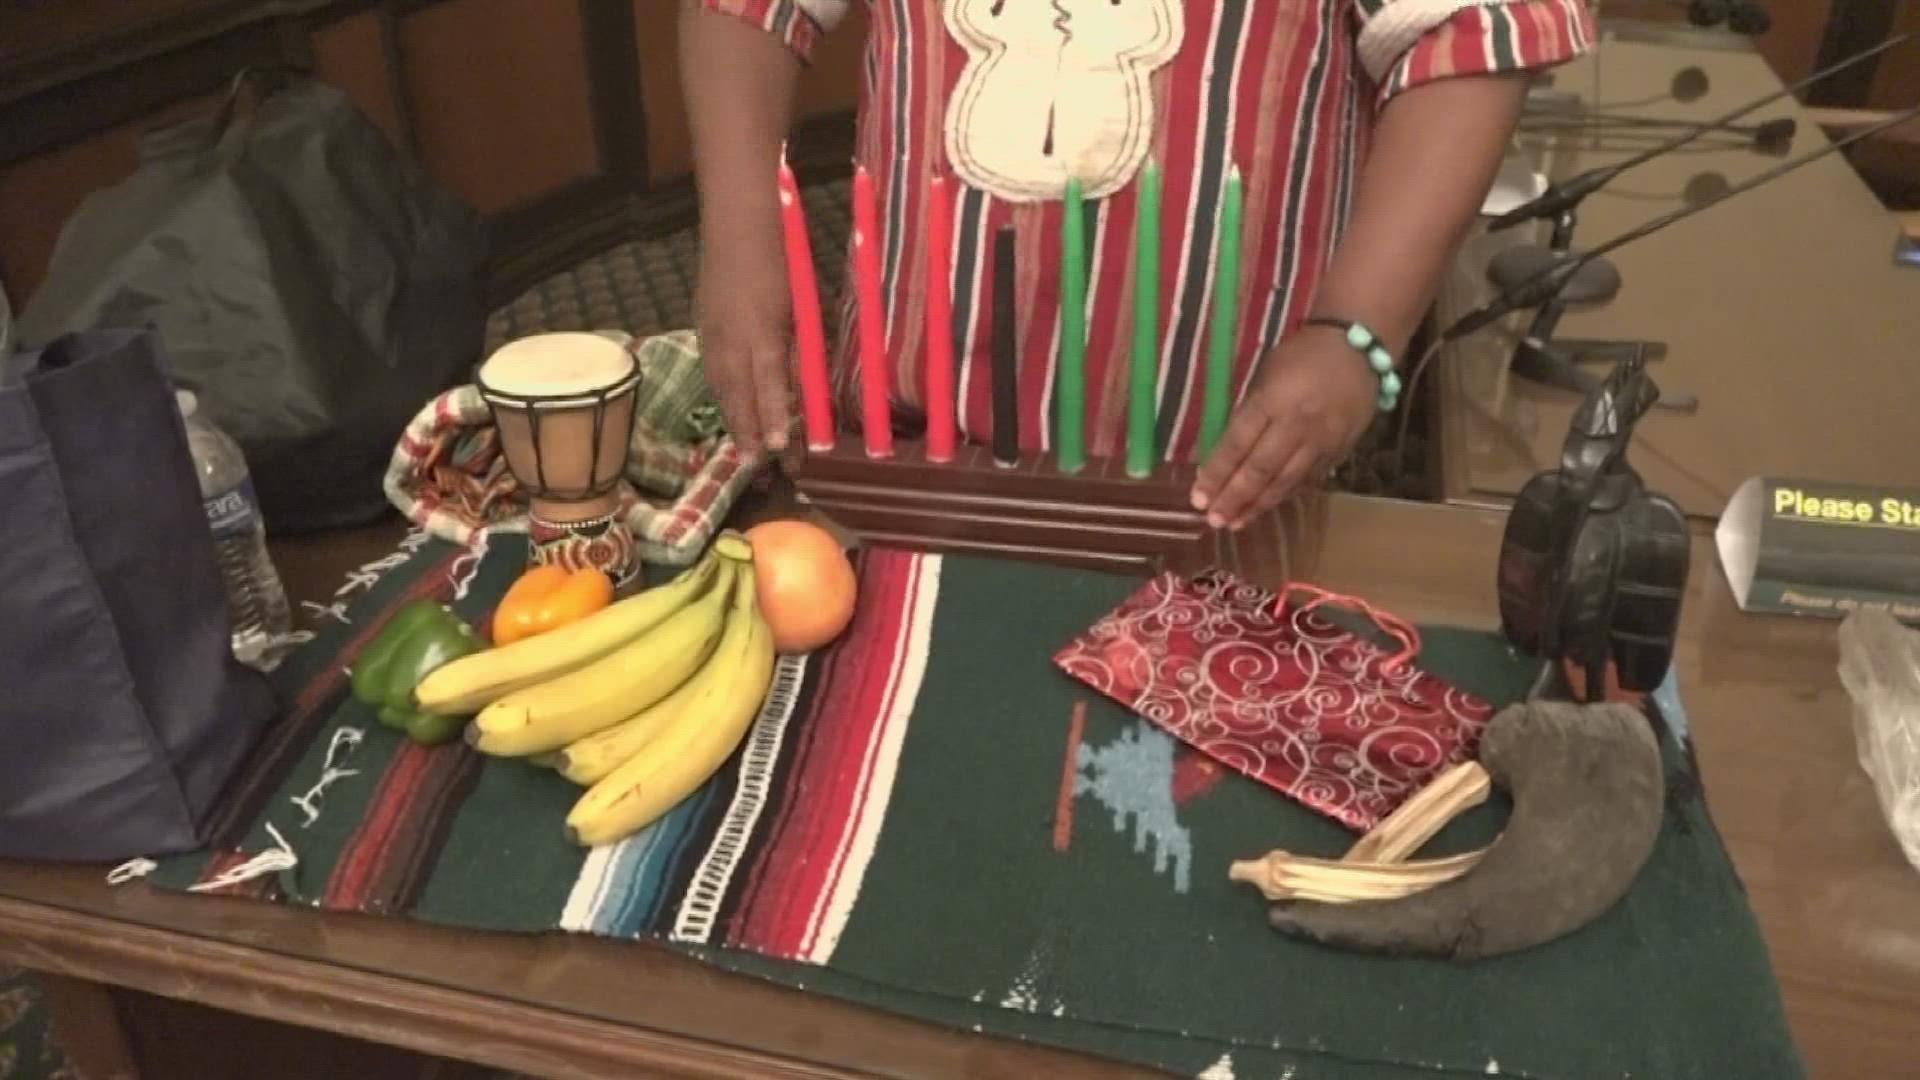 Kwanzaa is a week-long holiday celebrating African-American history, community, values and culture, with many in Sacramento observing the events.